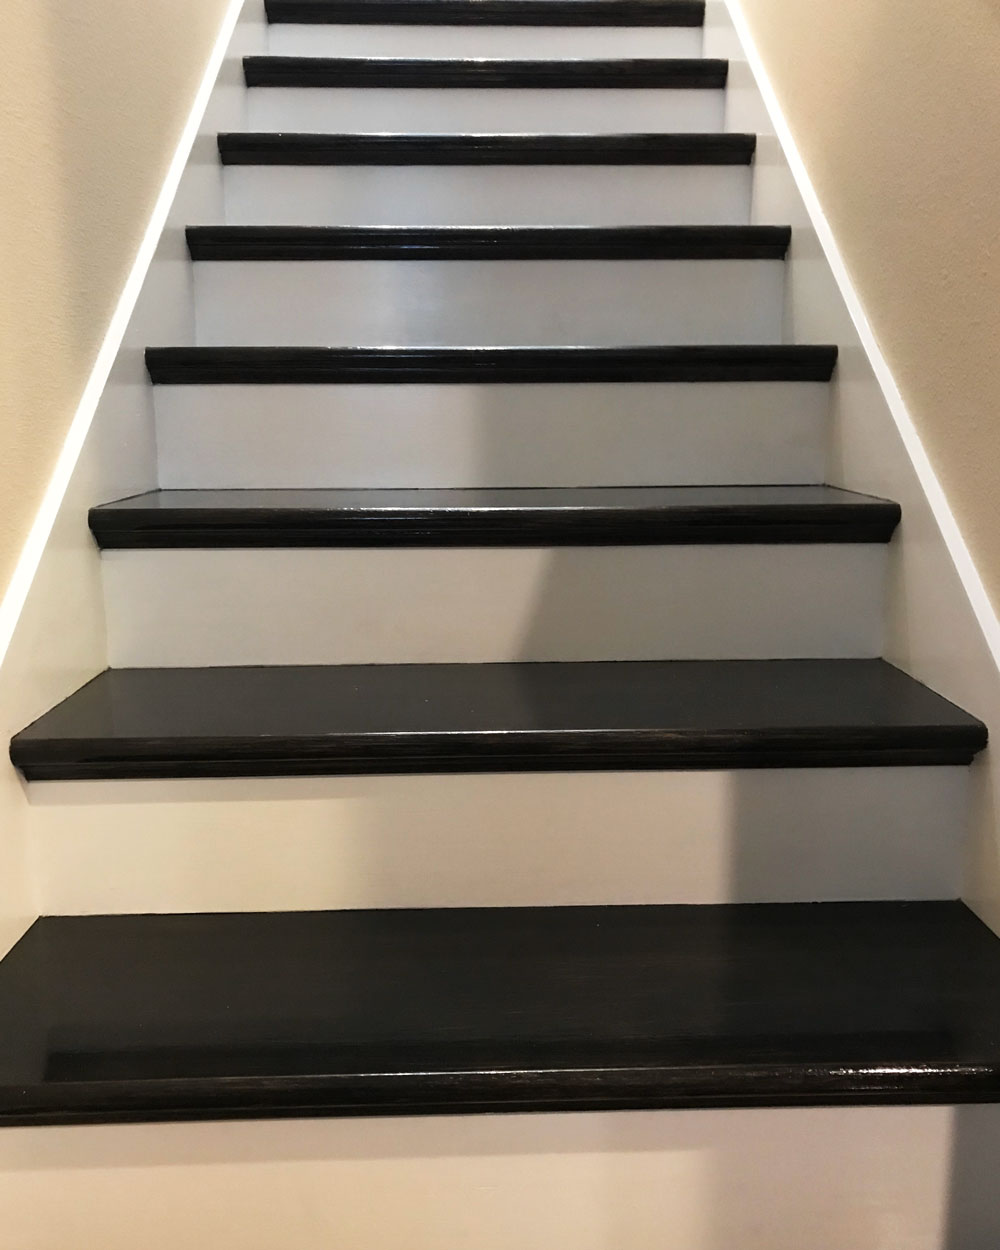 Staircase with black hardwood planks and white risers